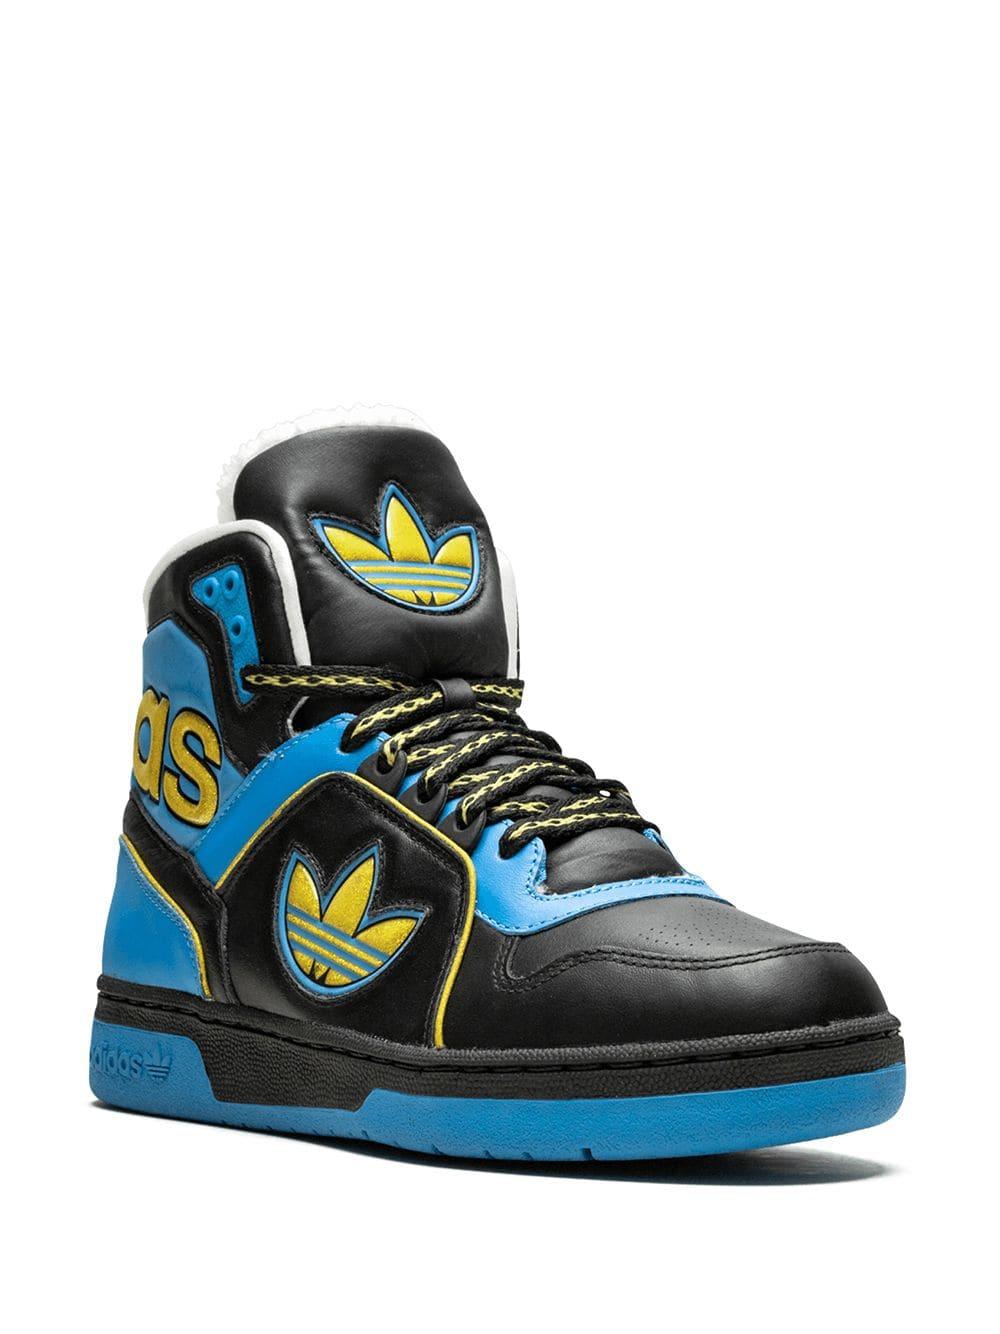 adidas Ecstasy Sneakers in Black,Blue,Gold (Blue) for Men | Lyst